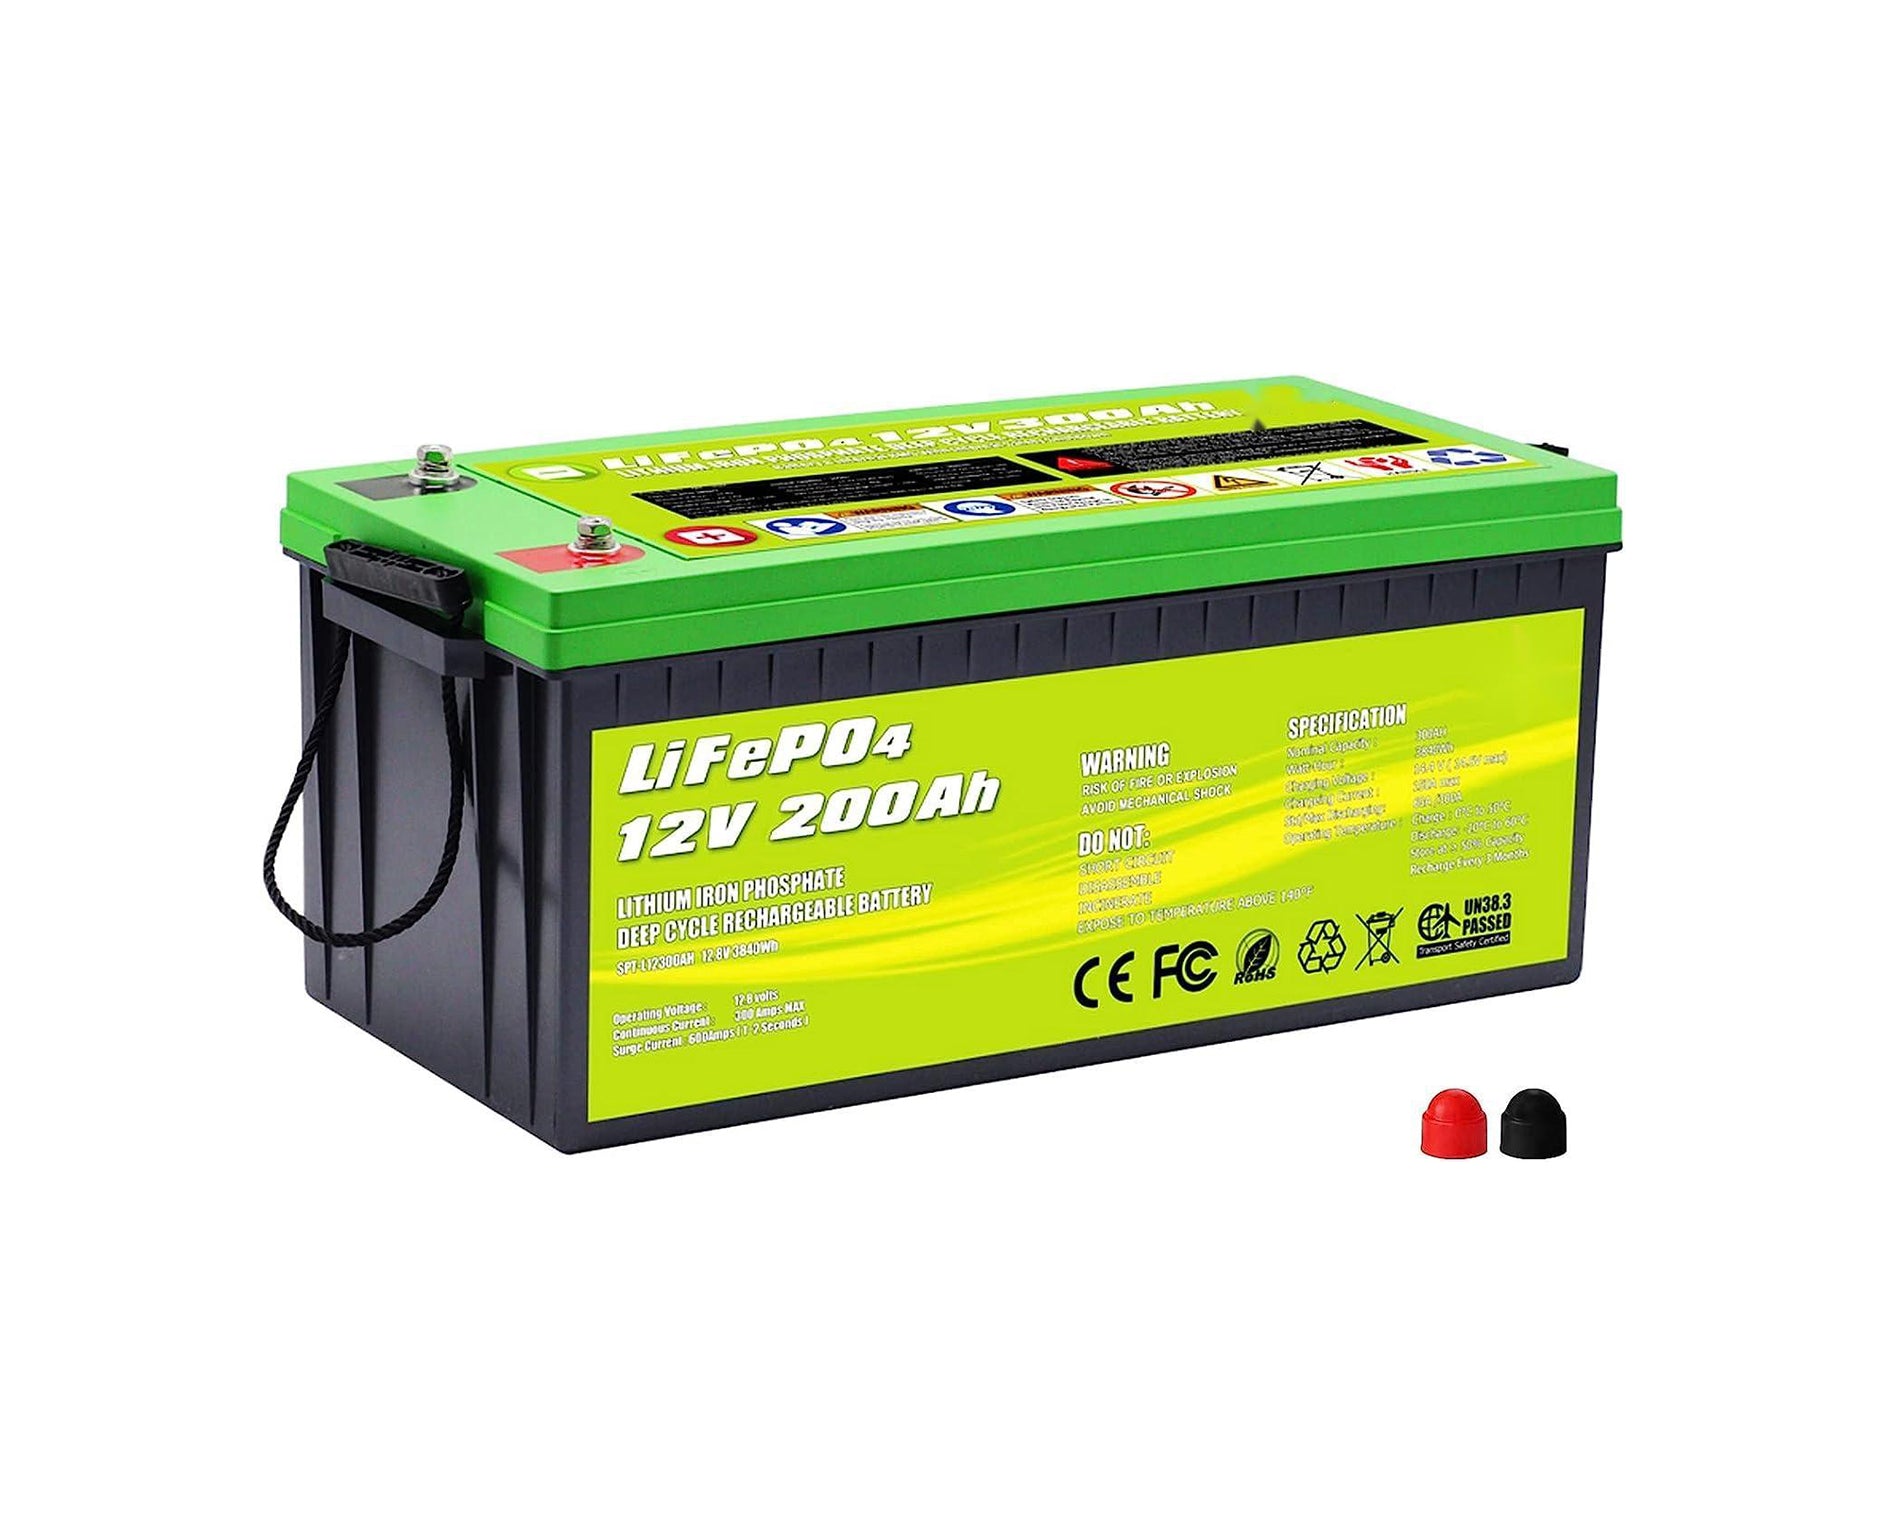 Rechargeable12V 200Ah Lifepo4 Battery Deep Cycle Lithium Iron